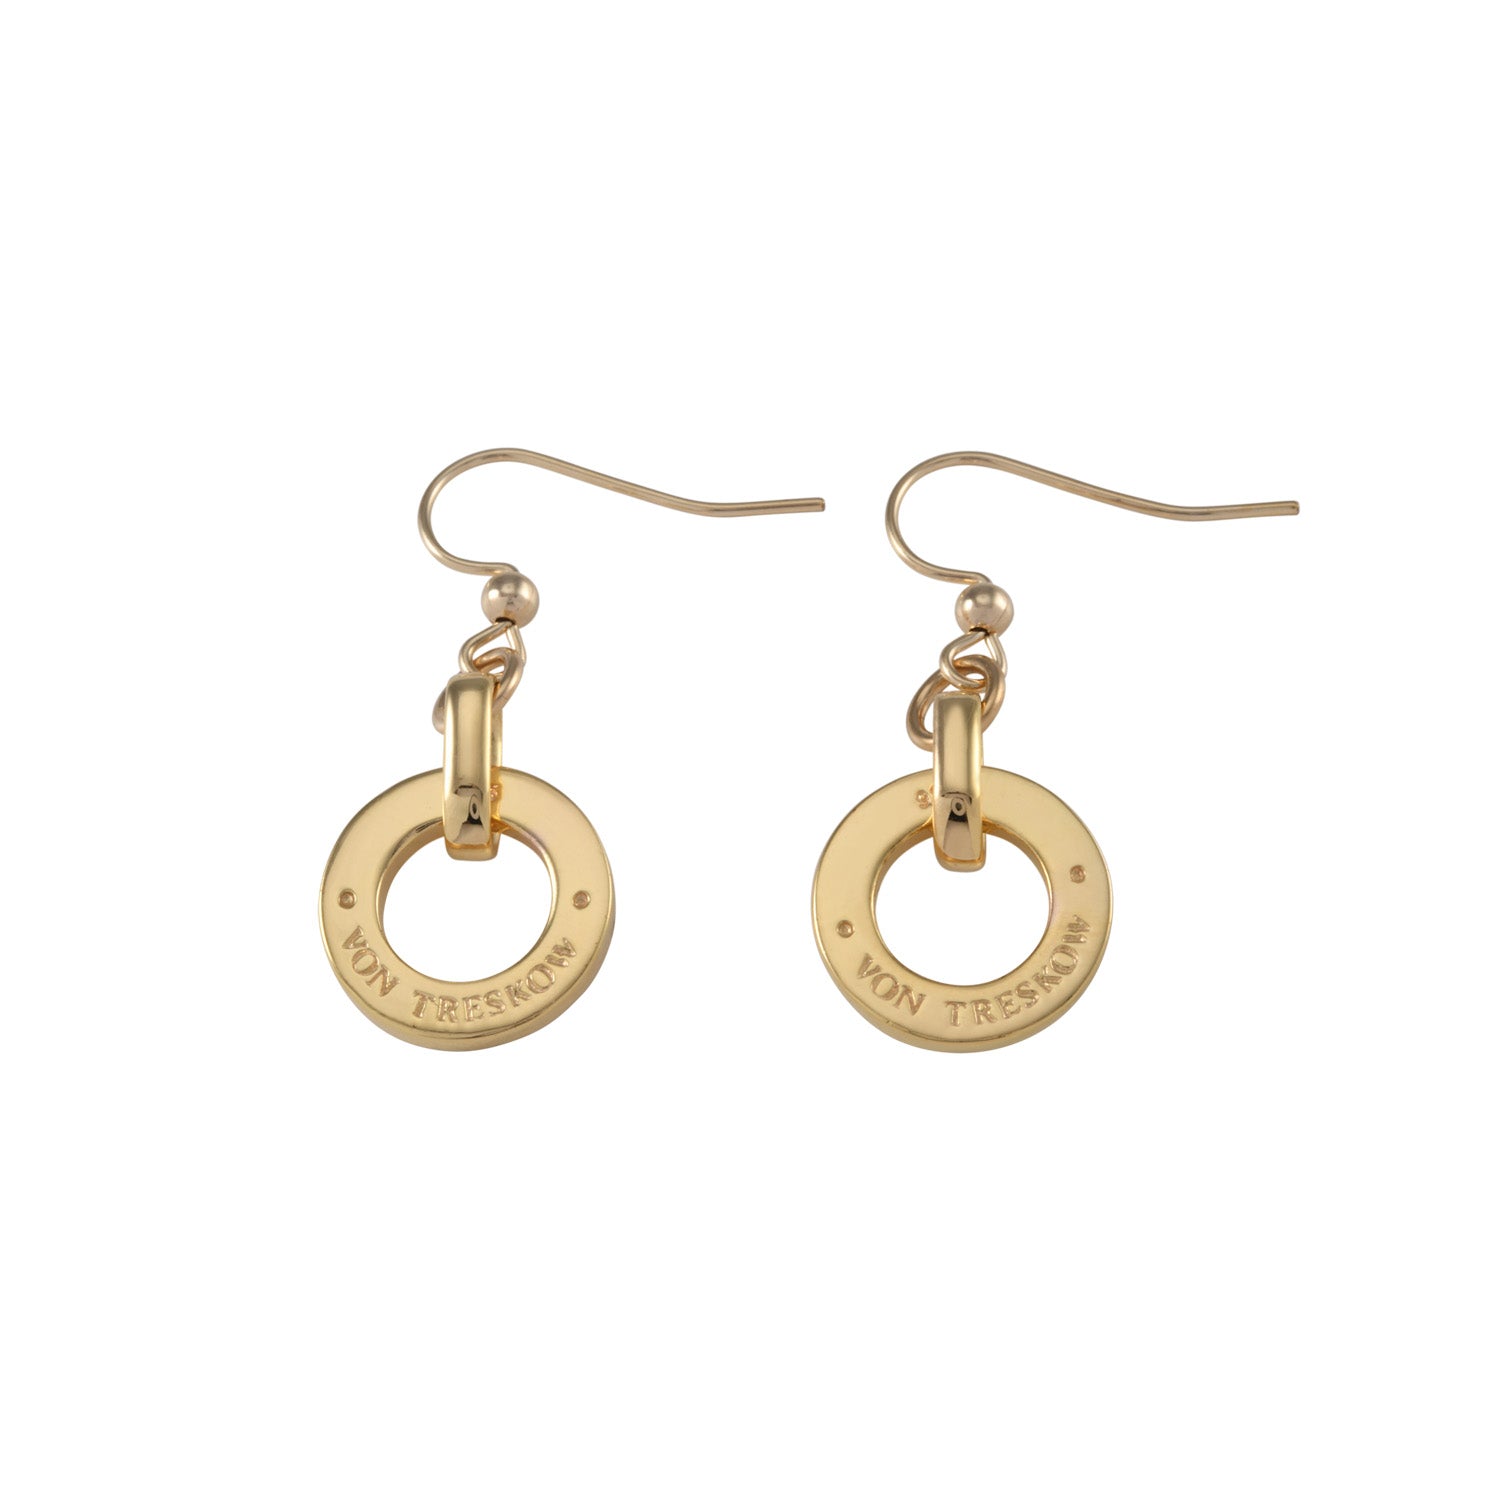 Vontreskow Yellow Gold Filled Earrings